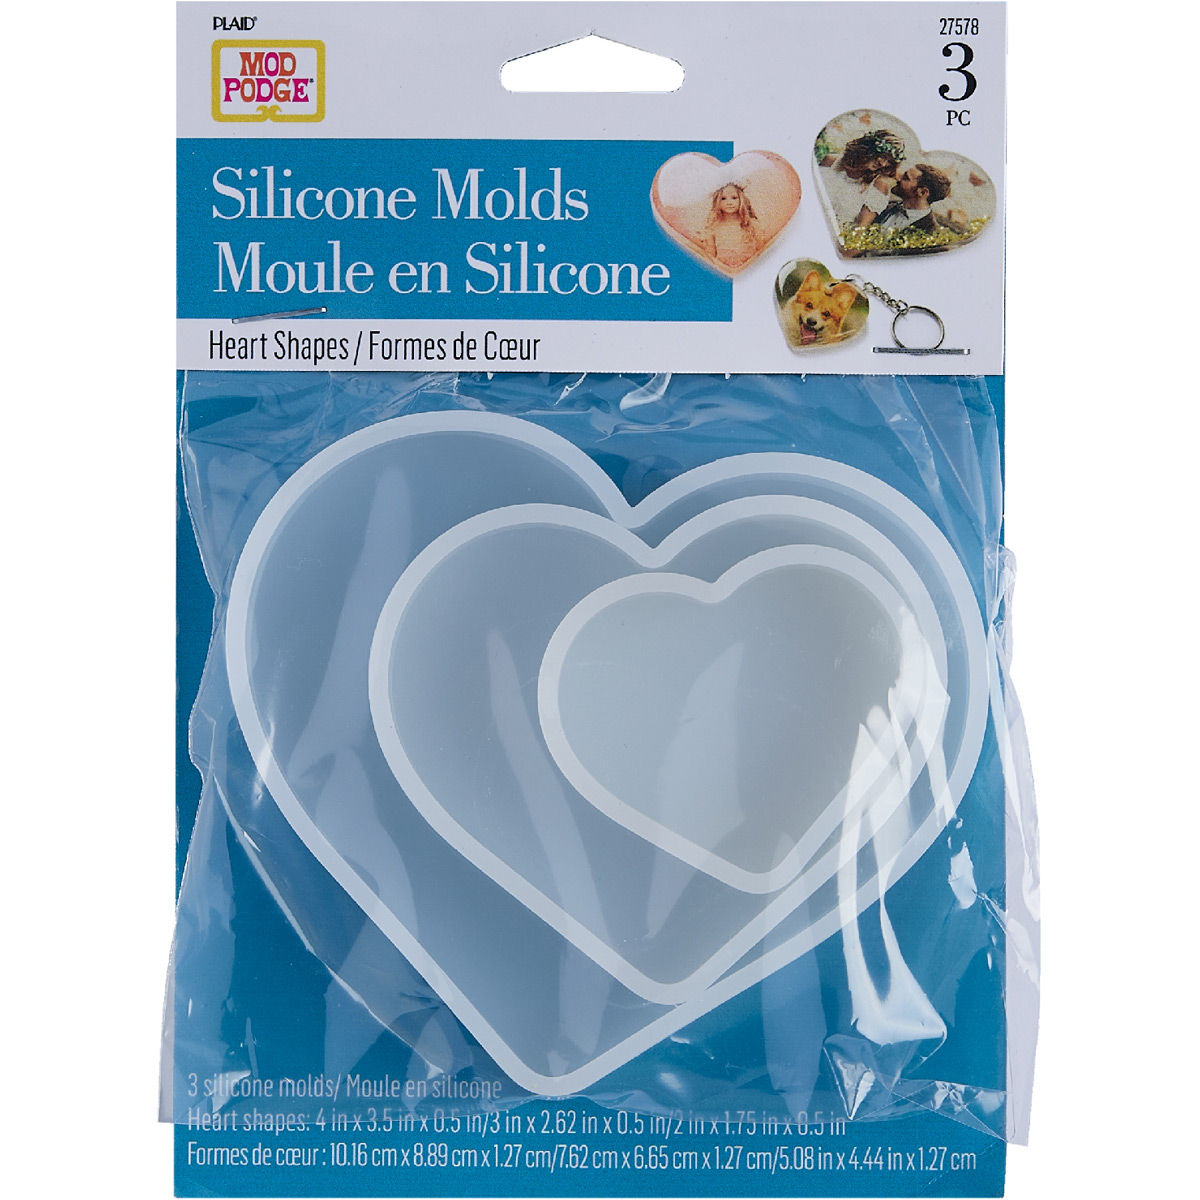 Mod Podge ® Silicone Molds - Hearts, 3 pc. - 27578